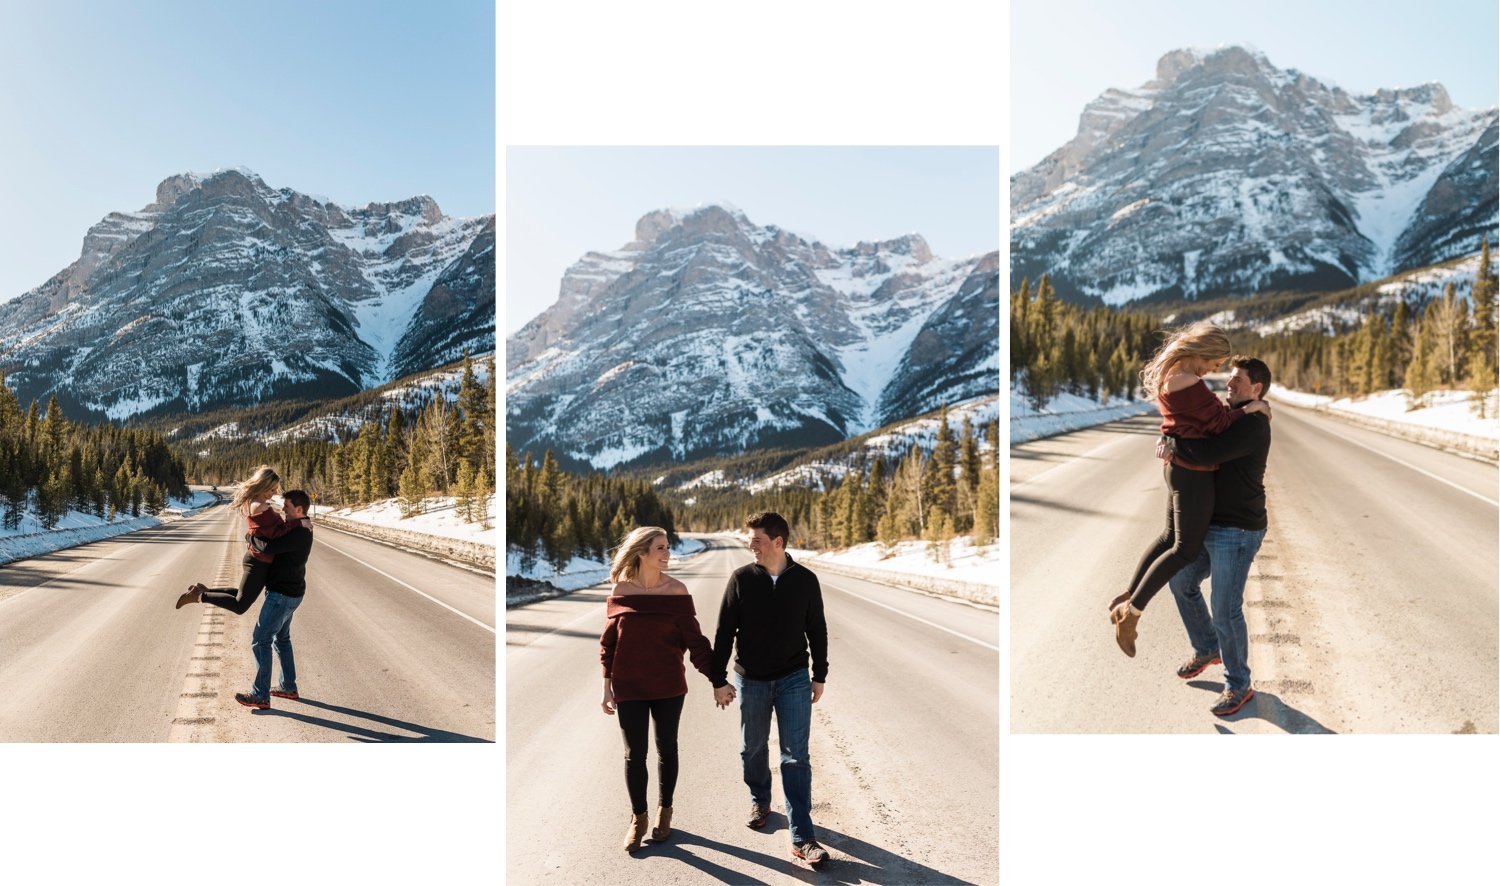 15_sunlight_landscape_Kananaskis_Canmore_Banff_trees_couple_engagement_close_dog_winter_cuddle_kiss_golden_hour_intimate_nature_mountains_fiancee_spring_simple_delicate_ice_bride_snow_soft_Calgary_Alberta_photographer_forest_groom_outdoor.jpg